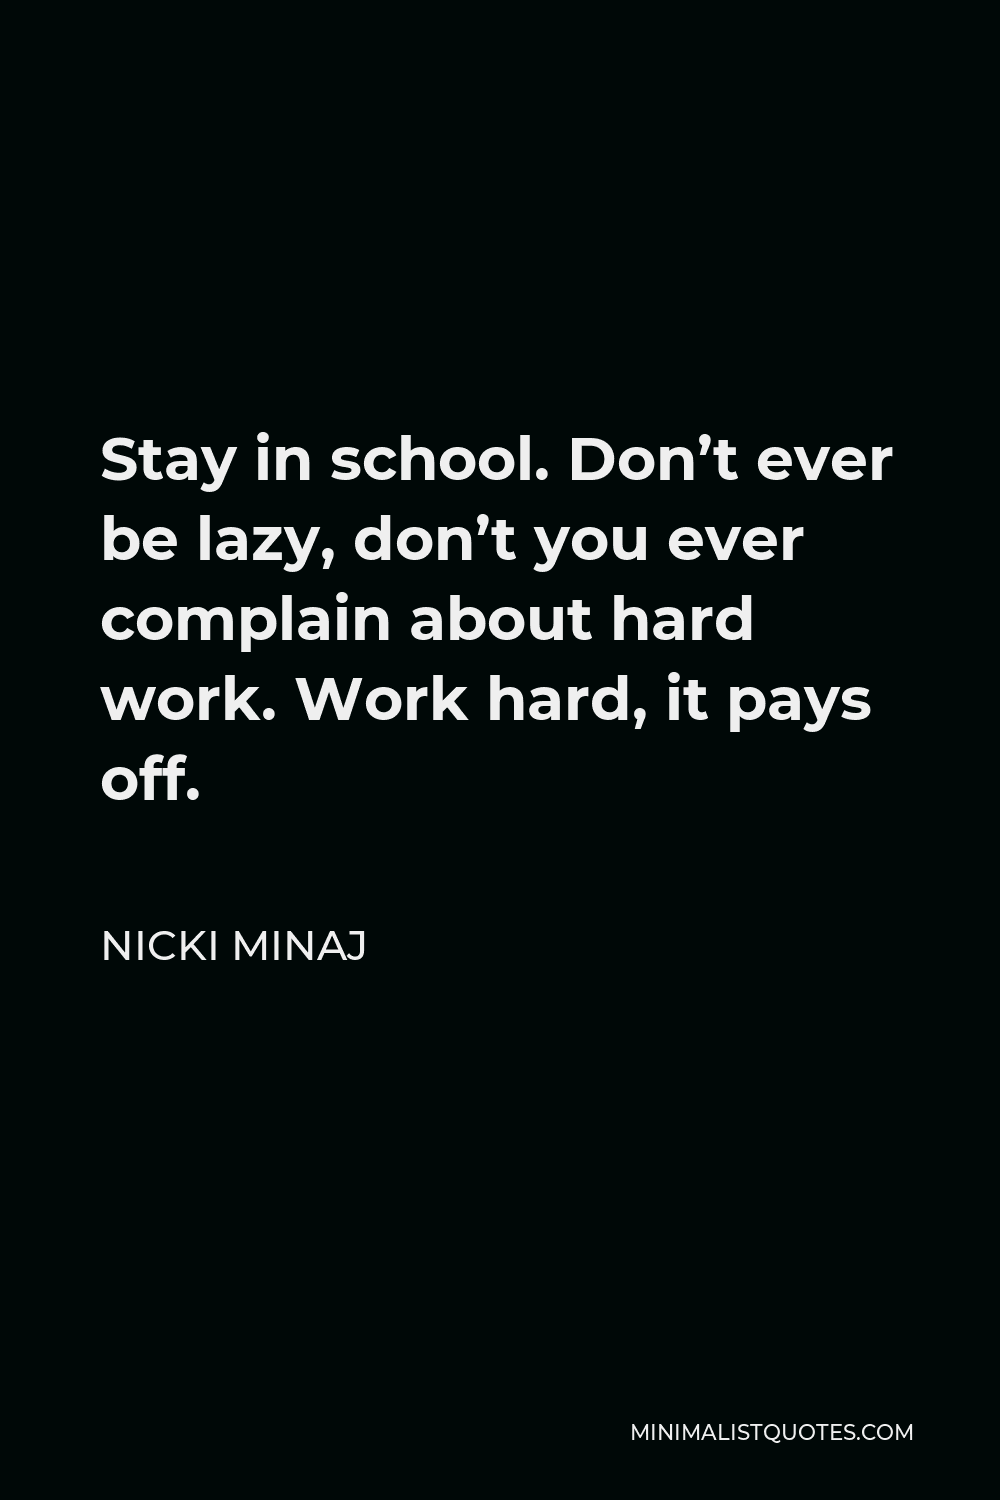 Nicki Minaj Quote Stay In School Don T Ever Be Lazy Don T You Ever Complain About Hard Work Work Hard It Pays Off